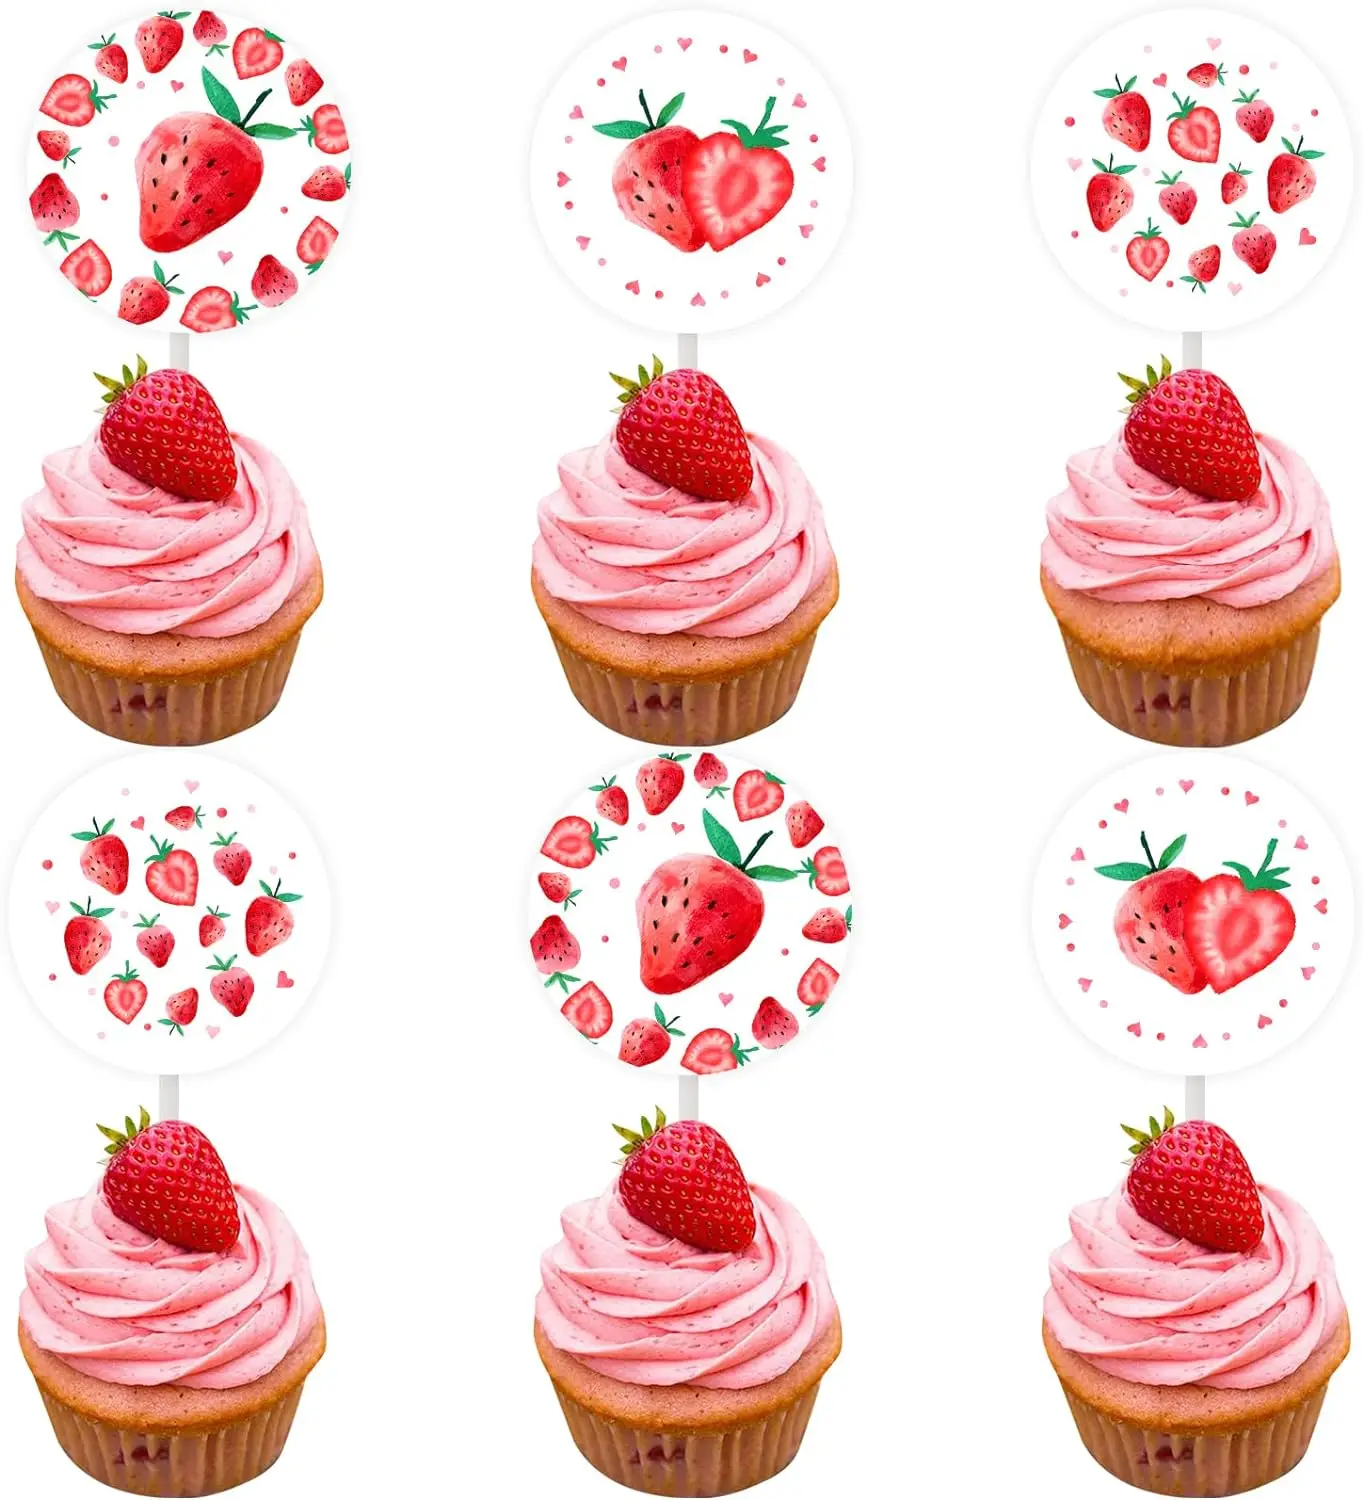 

24 Pack Strawberry Cupcake Toppers Birthday Baby Shower Summer Fruit Theme Decor Dessert Ornaments Pink Berry Cake Decors